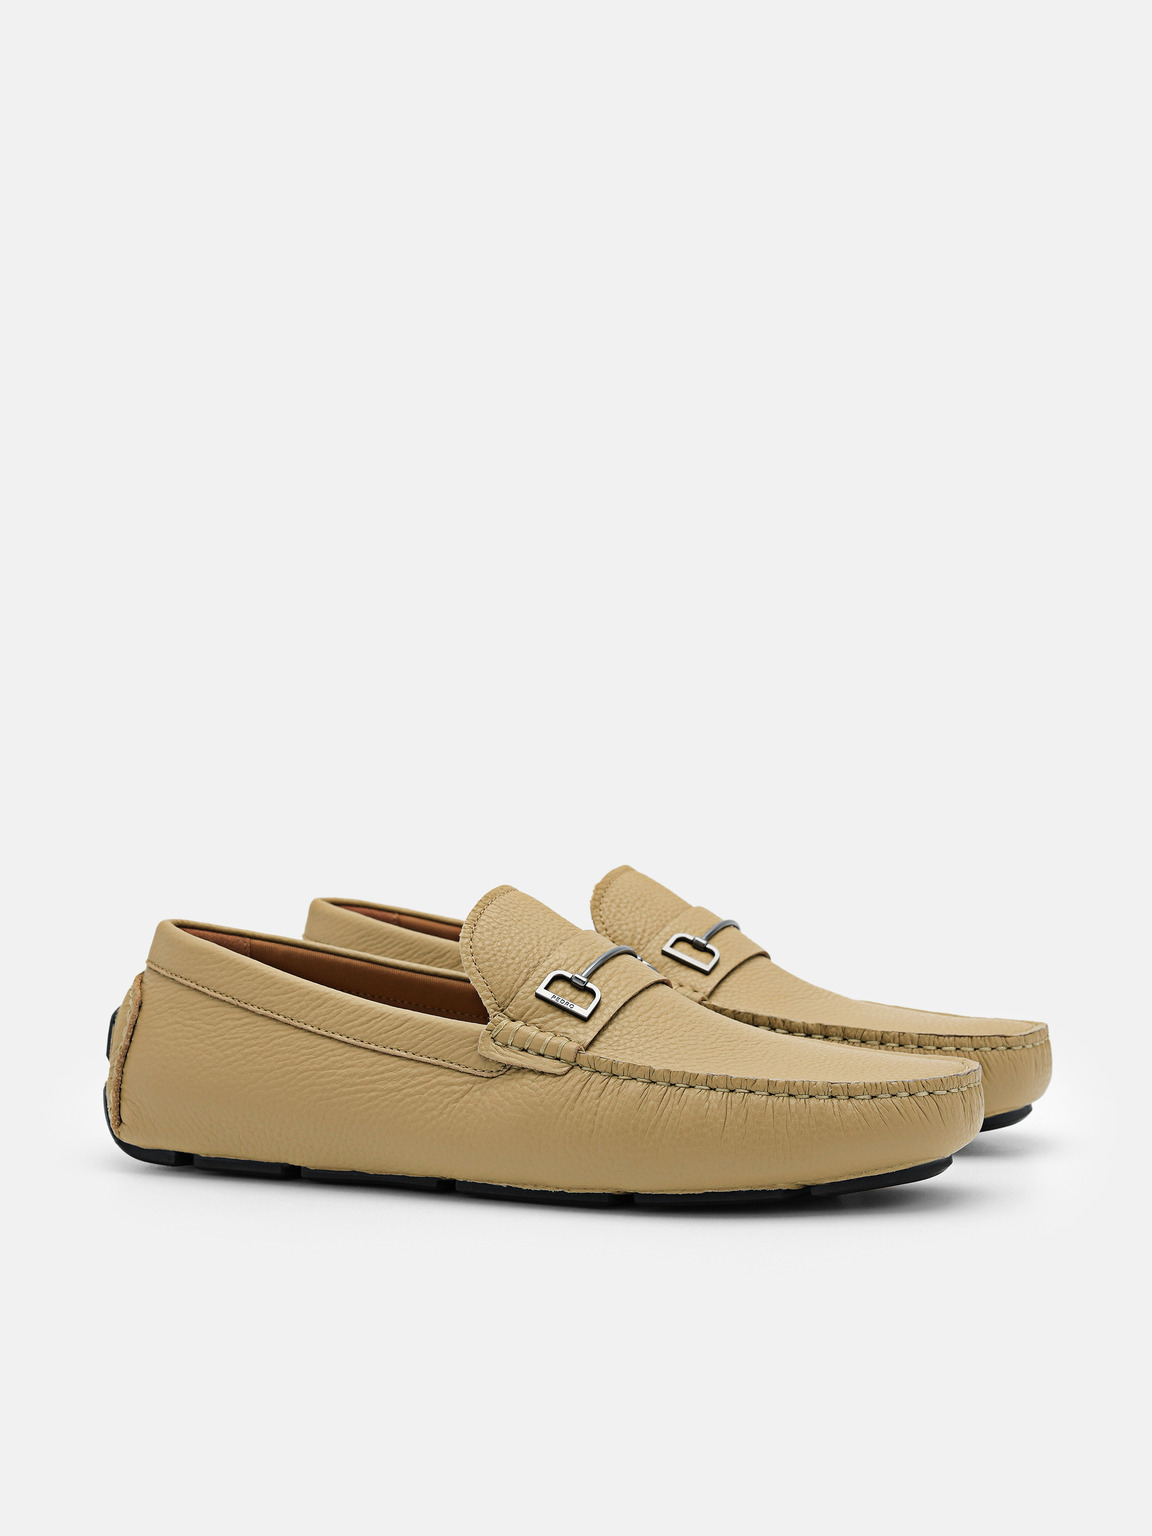 Casey Leather Driving Shoes, Sand